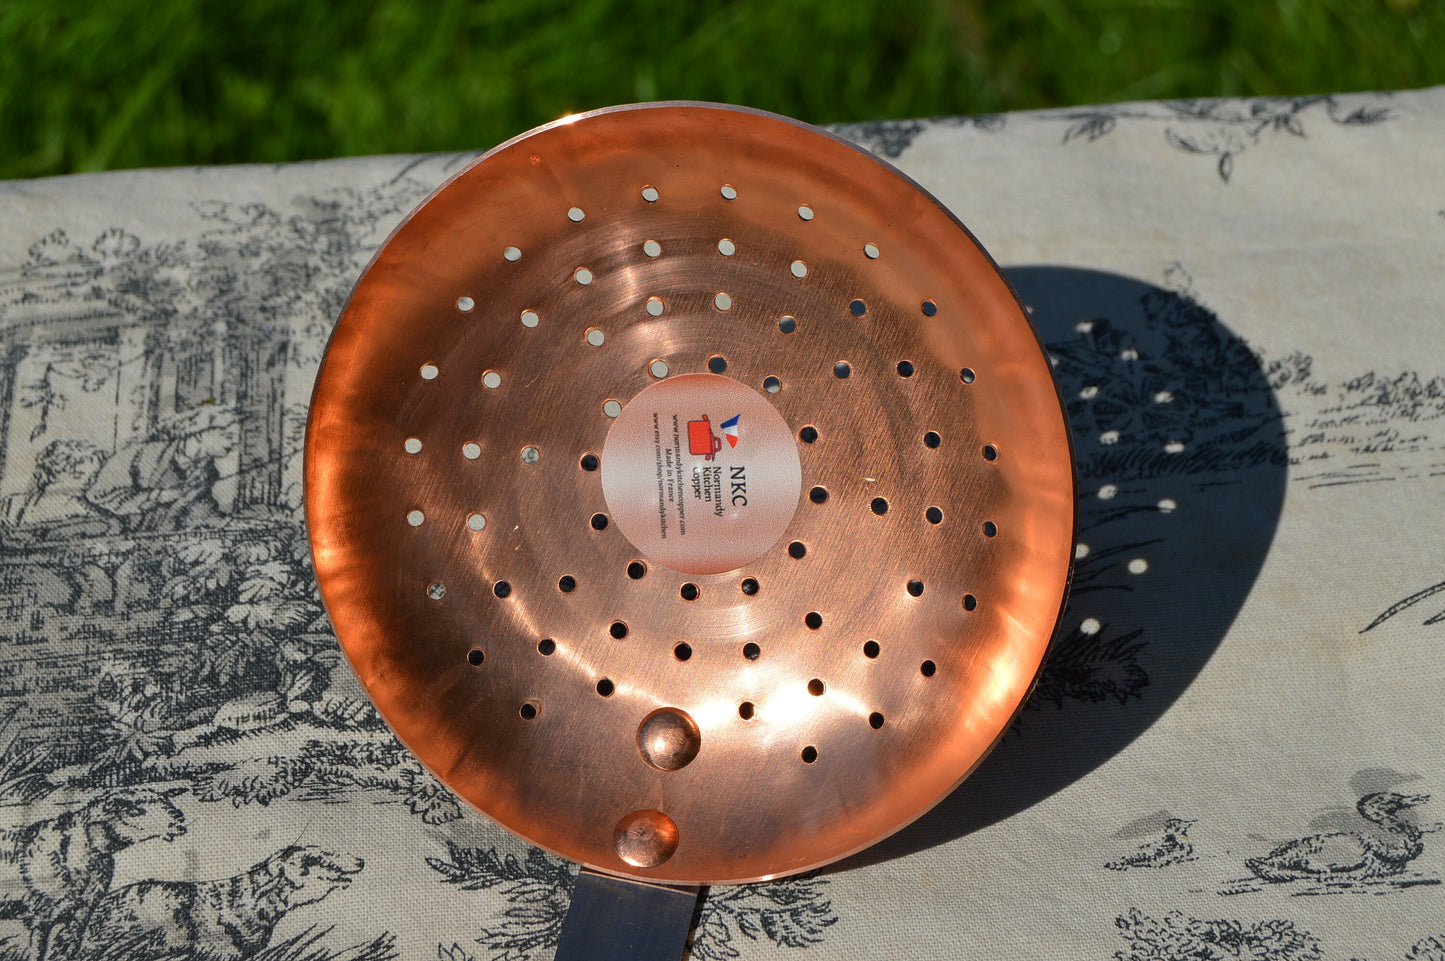 New NKC Copper Skimmer Ecumoire from Normandy Kitchen Copper Jam Jelly Spoon Stainless Steel Handle New Normandy Kitchen Copper Collection